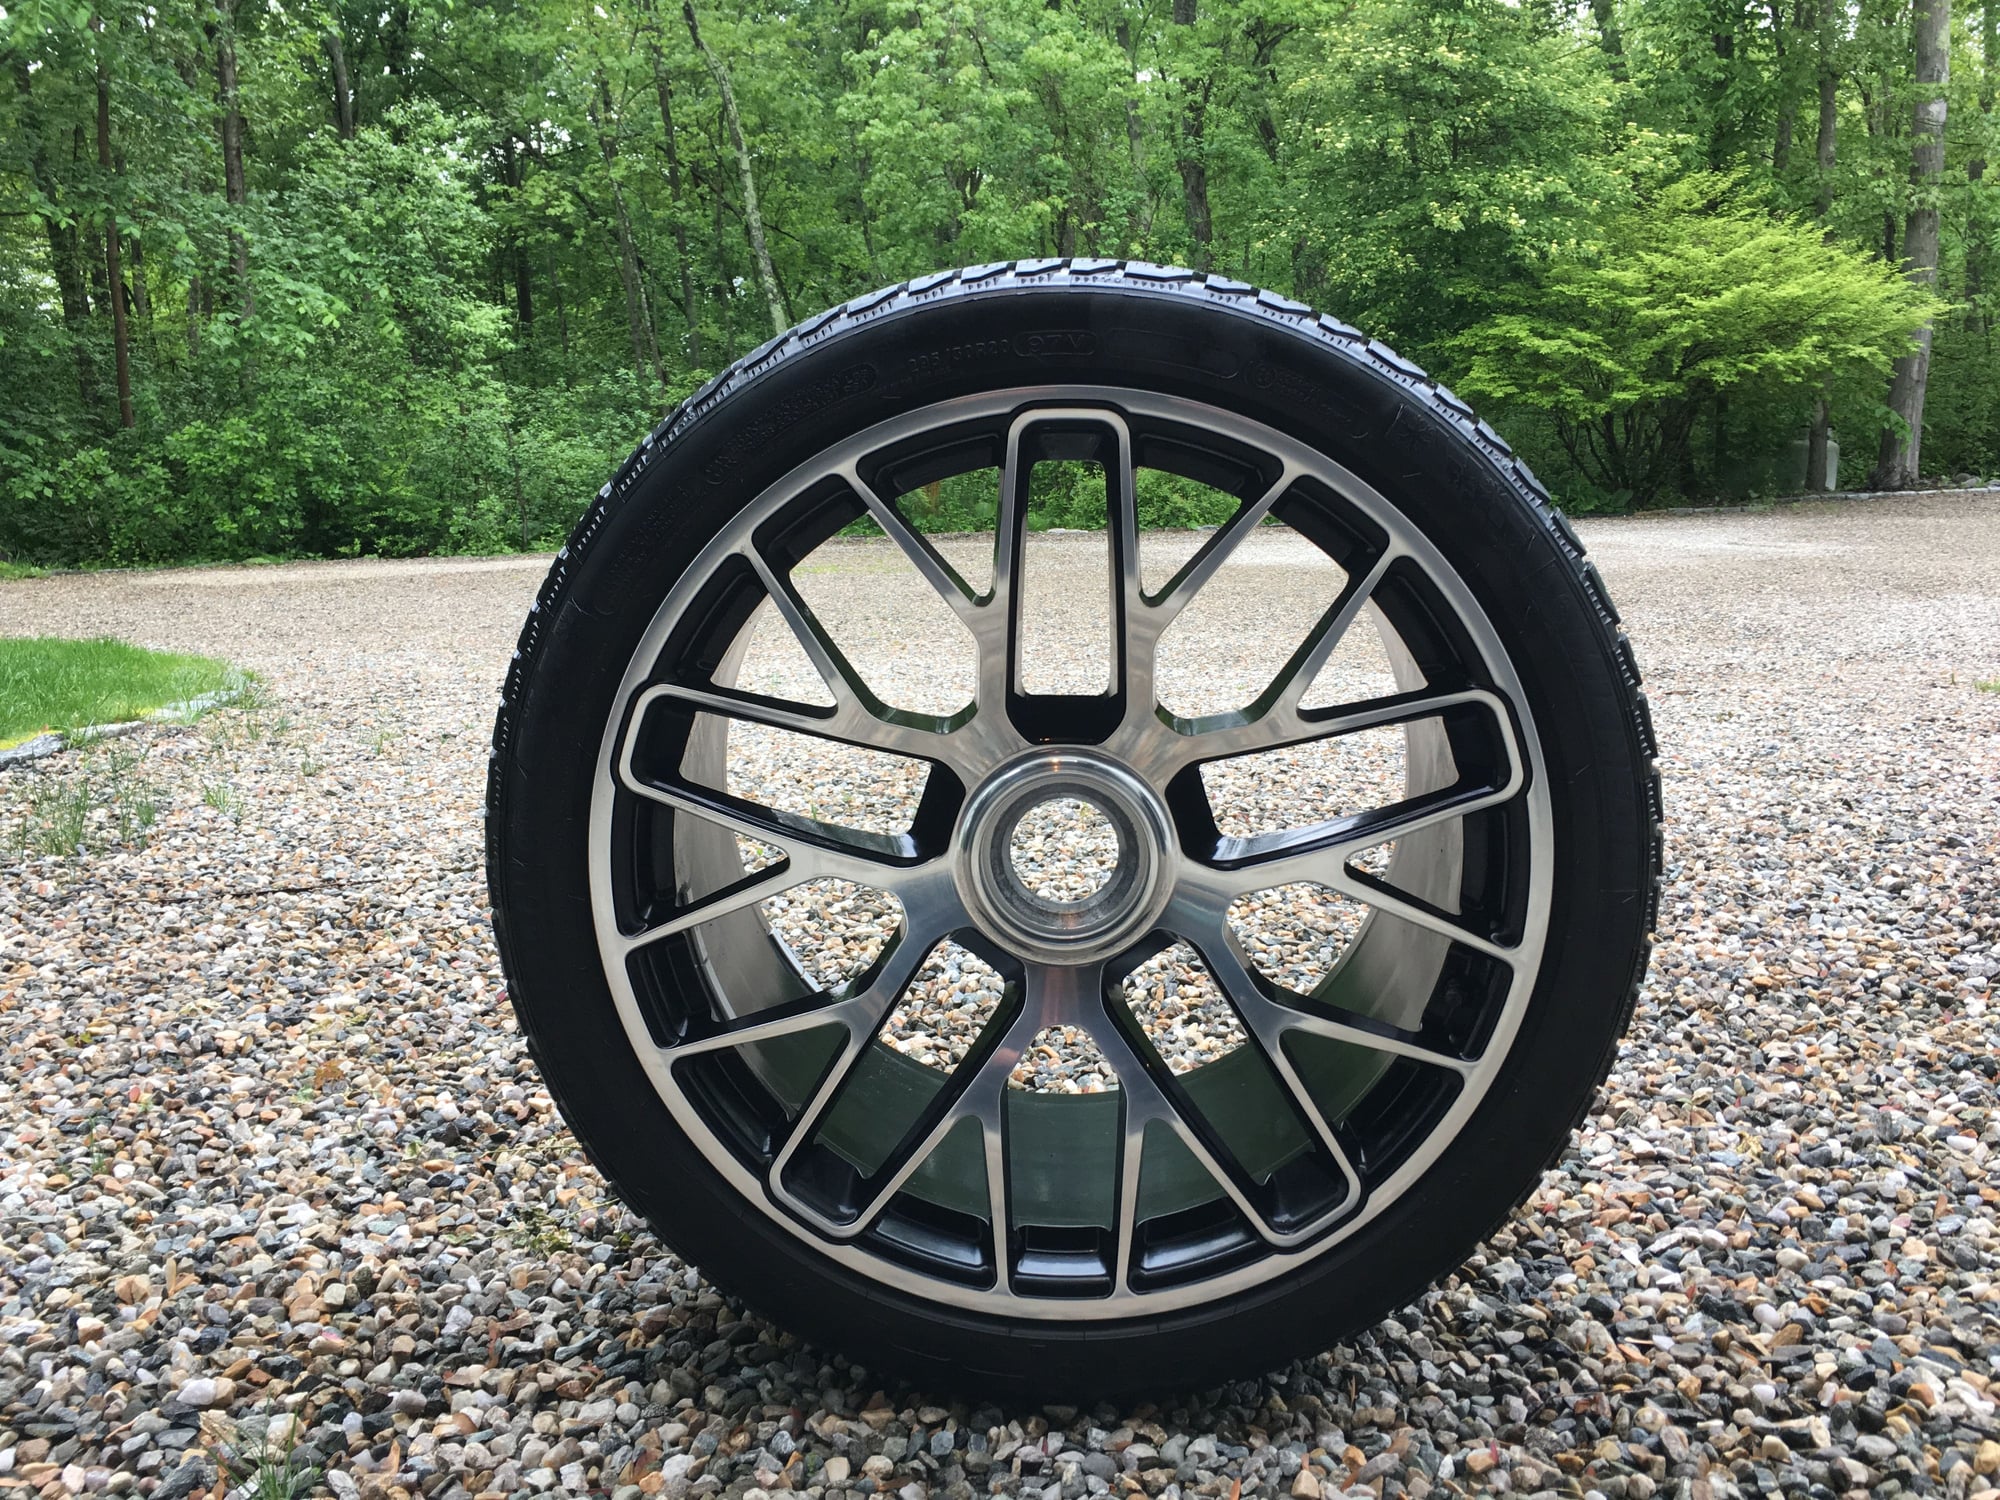 Wheels and Tires/Axles - GT3 Winter Wheels & Tires - Used - 2014 to 2019 Porsche GT3 - Westport, CT 06880, United States